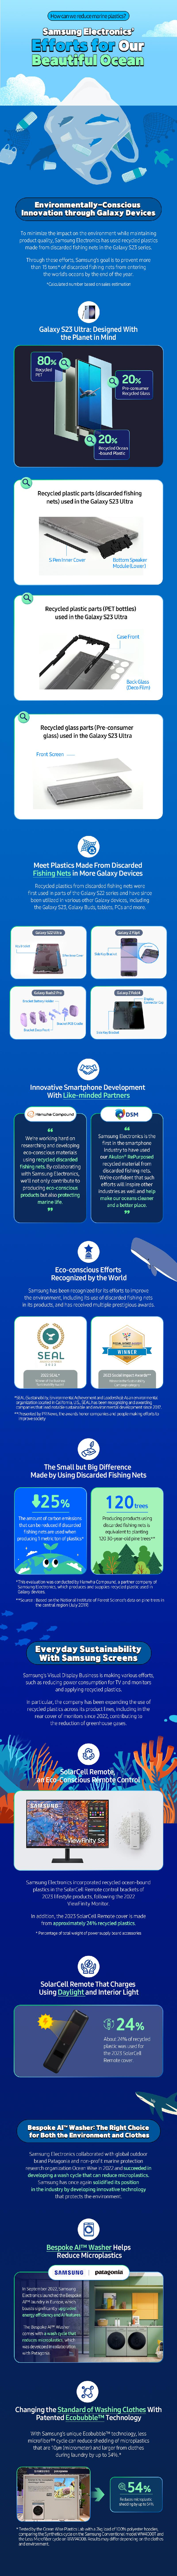 Infographic-Samsung-Electronics-Efforts-for-Our-Beautiful-Ocean.jpg